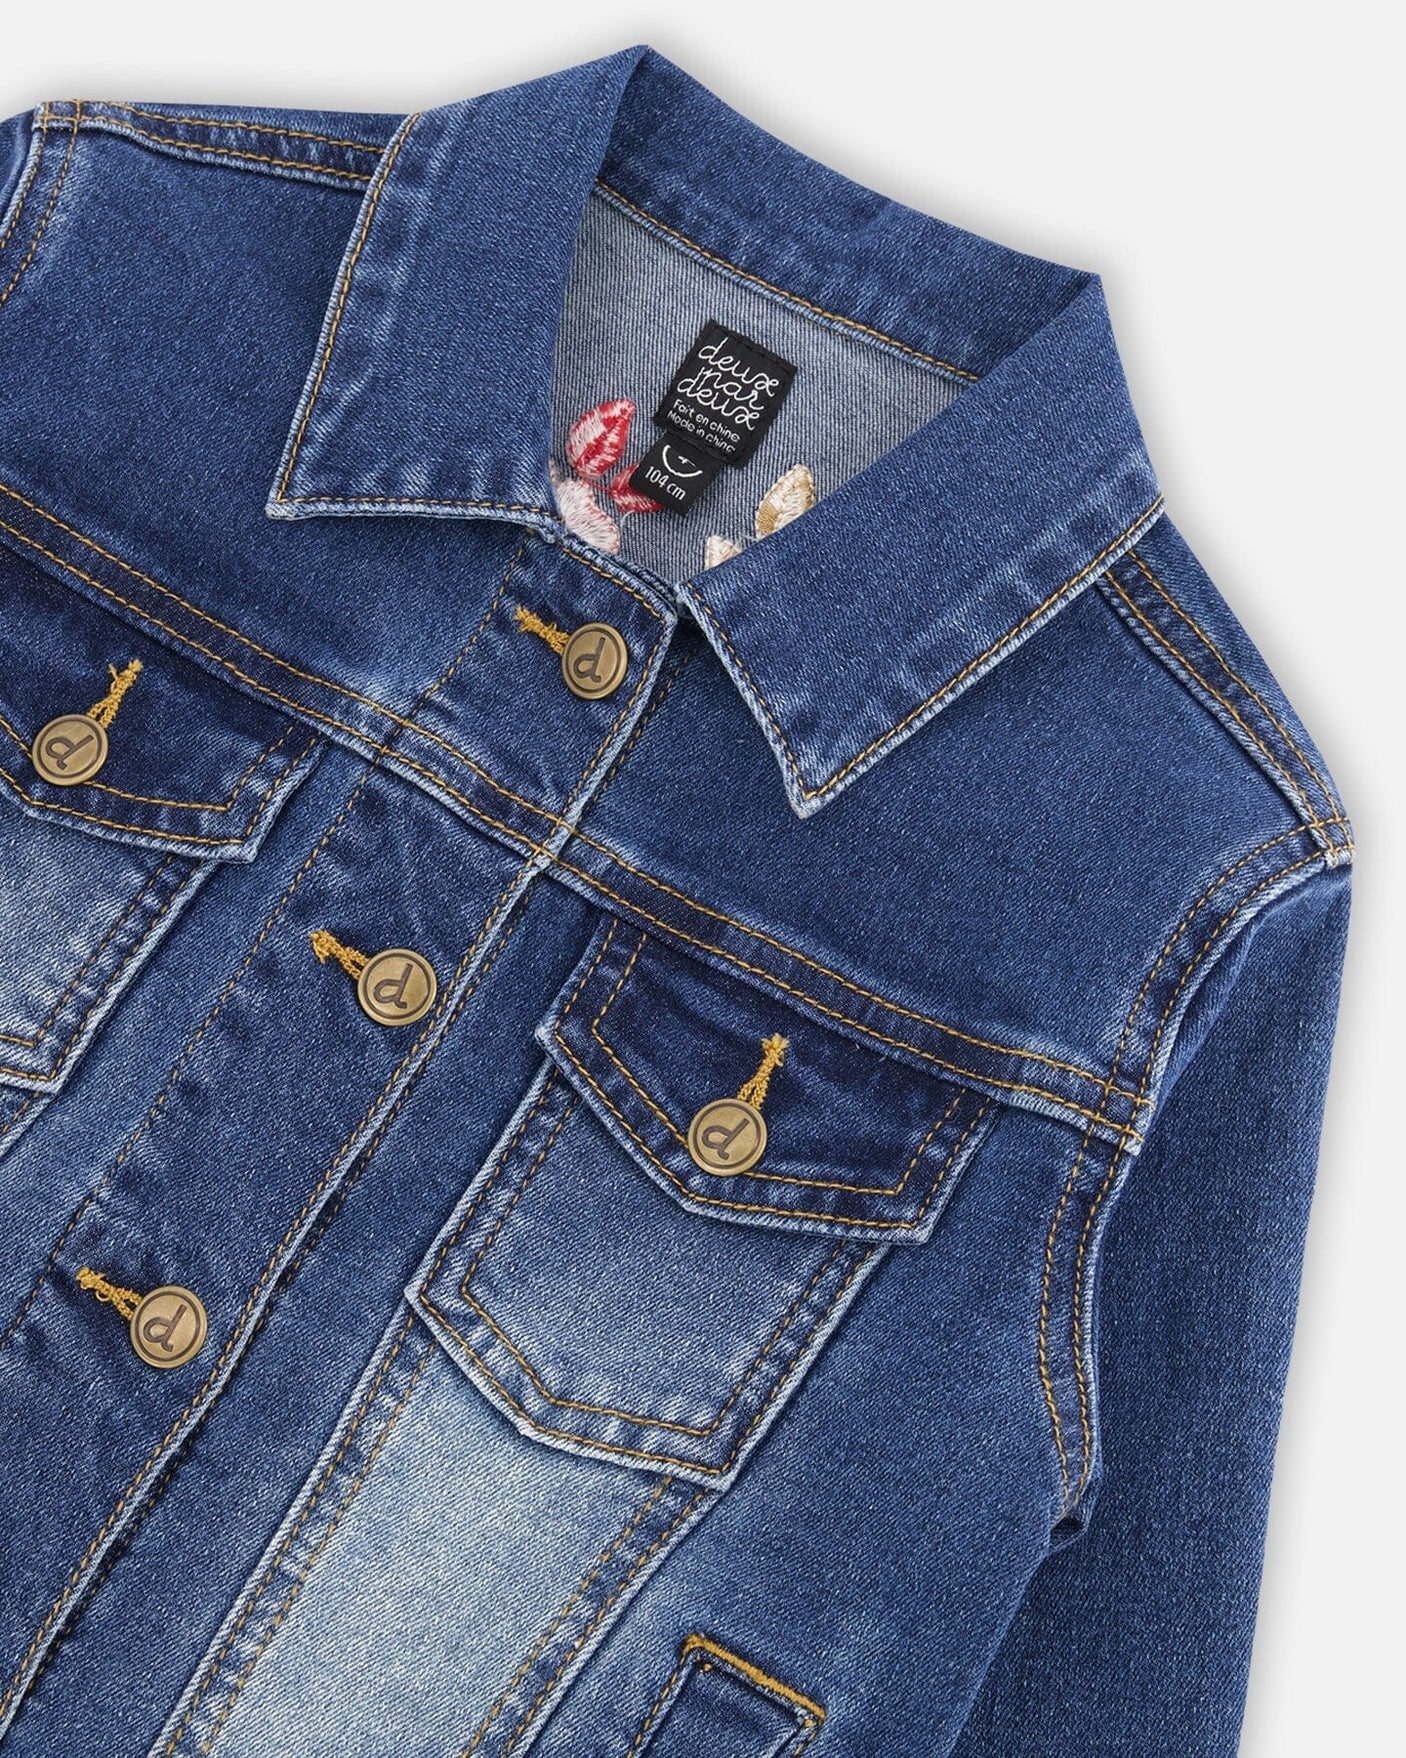 Denim Jacket With Embroidery-4